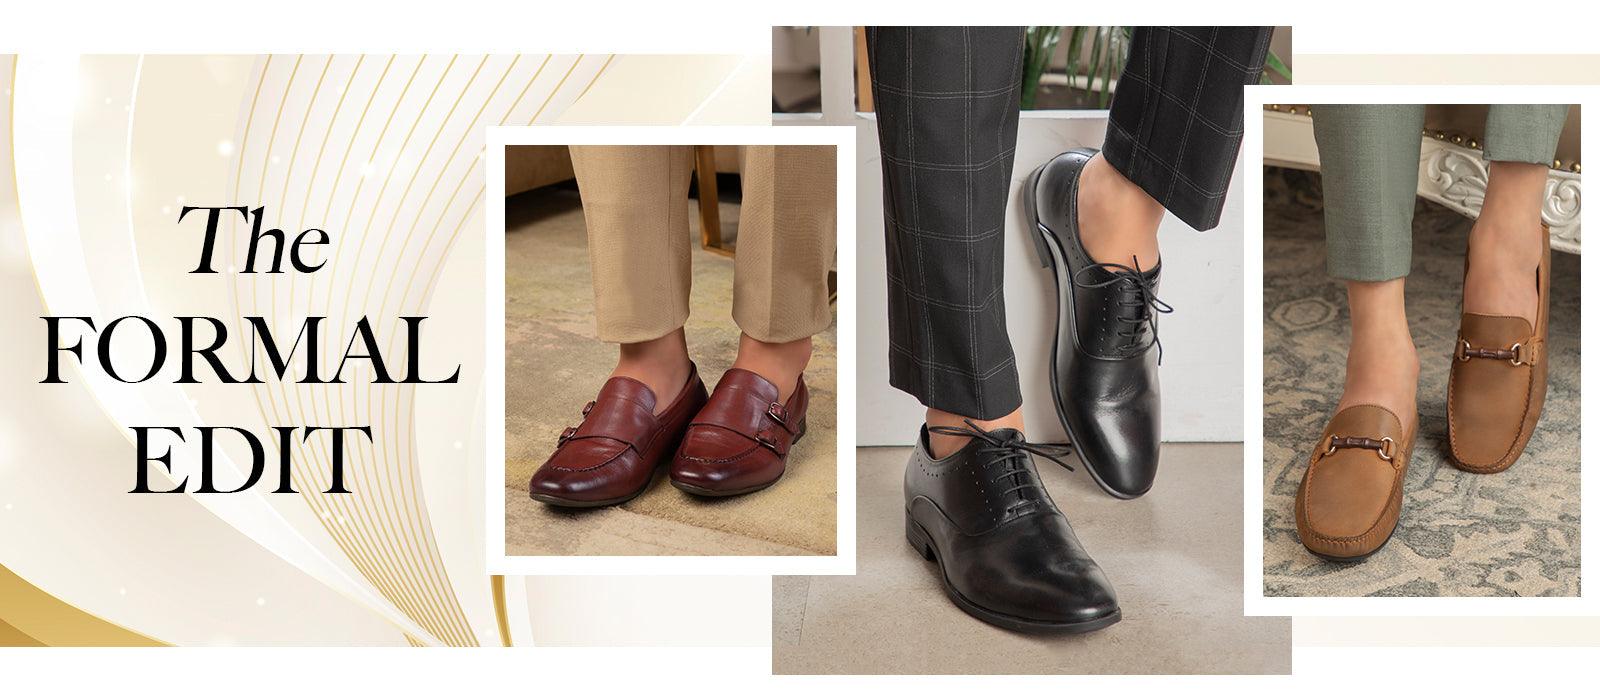 How to select the correct formal shoes for an event? - Tresmode